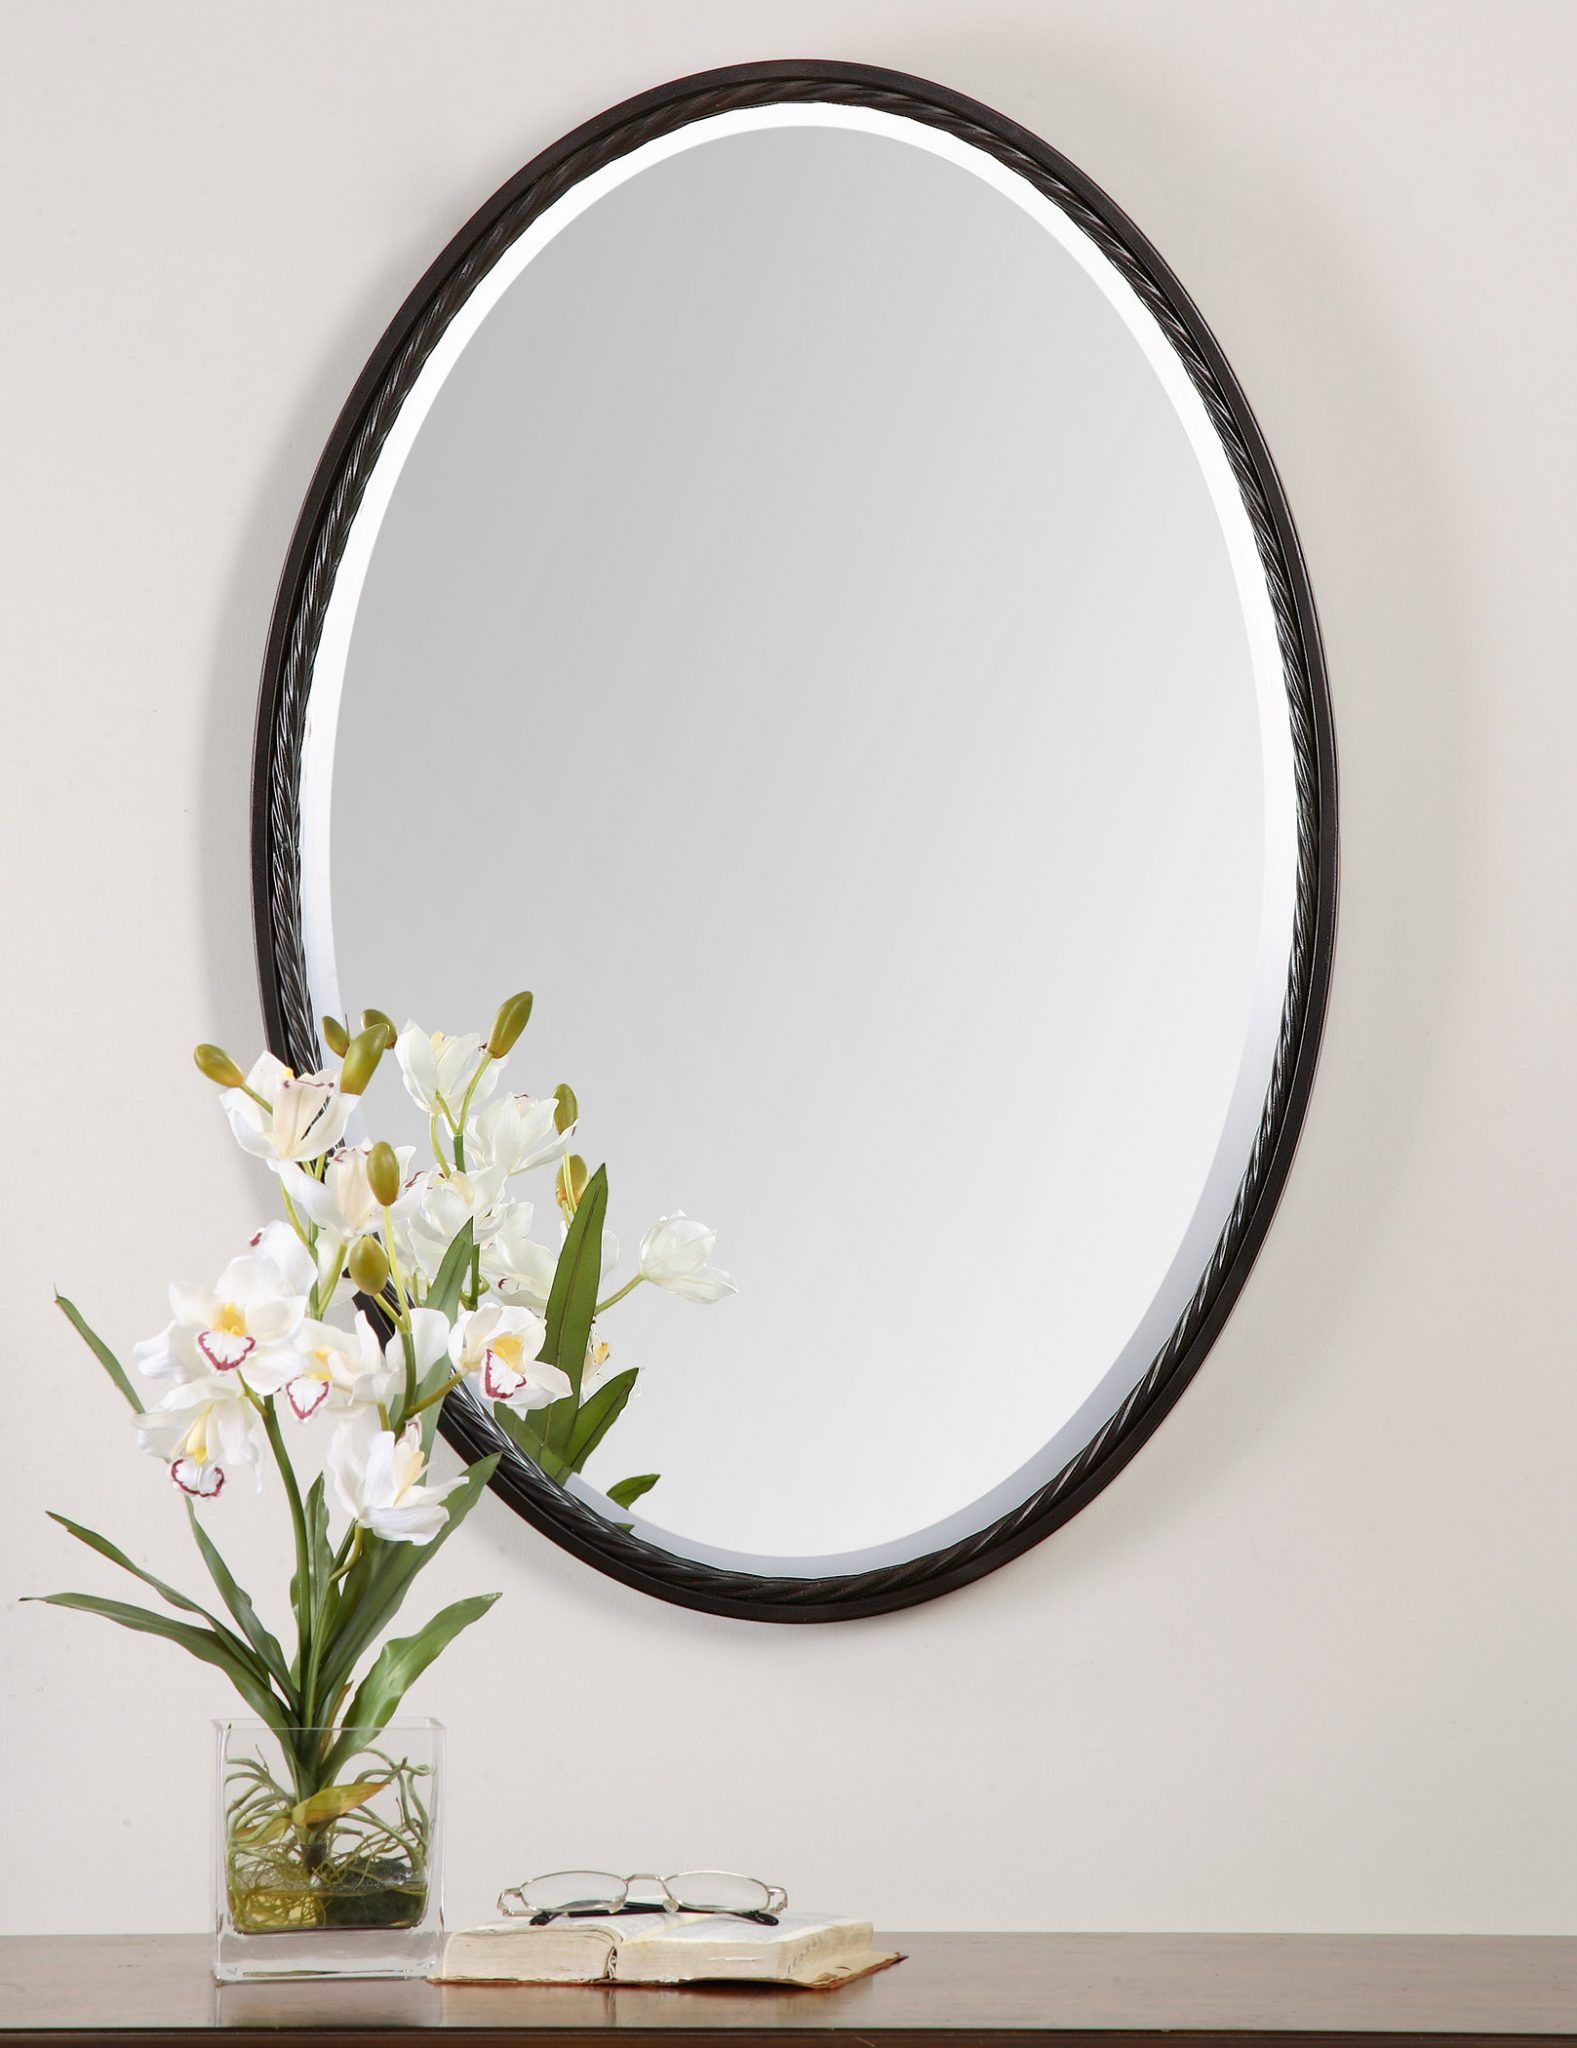 Uttermost Casalina Oil Rubbed Bronze Oval Mirror – Sacksteder's Inside Oil Rubbed Bronze Finish Oval Wall Mirrors (View 15 of 15)